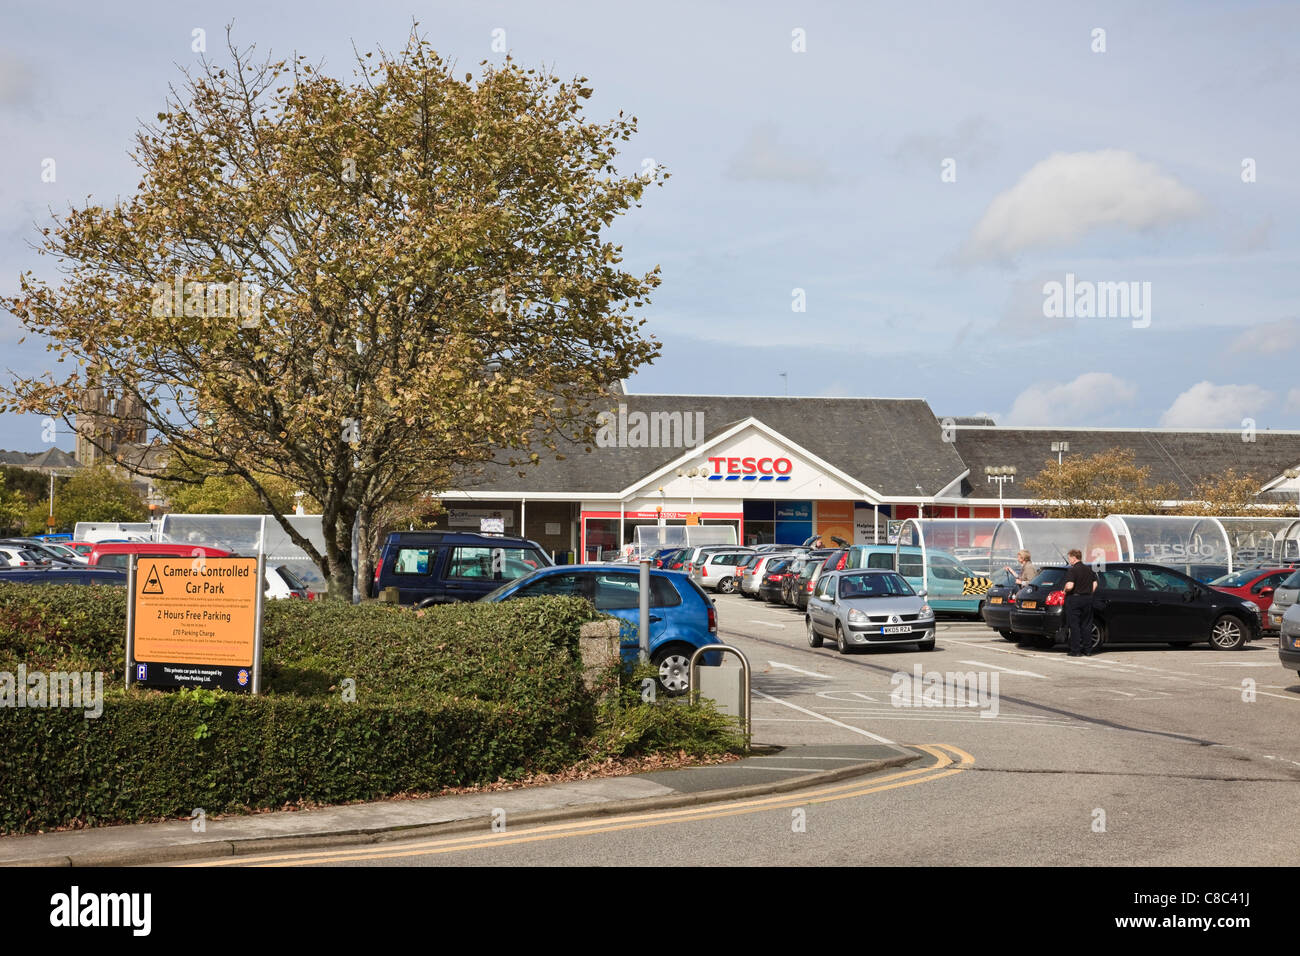 Tesco store with cars parked in the car park. Truro, Cornwall, England, UK, Great Britain. Stock Photo